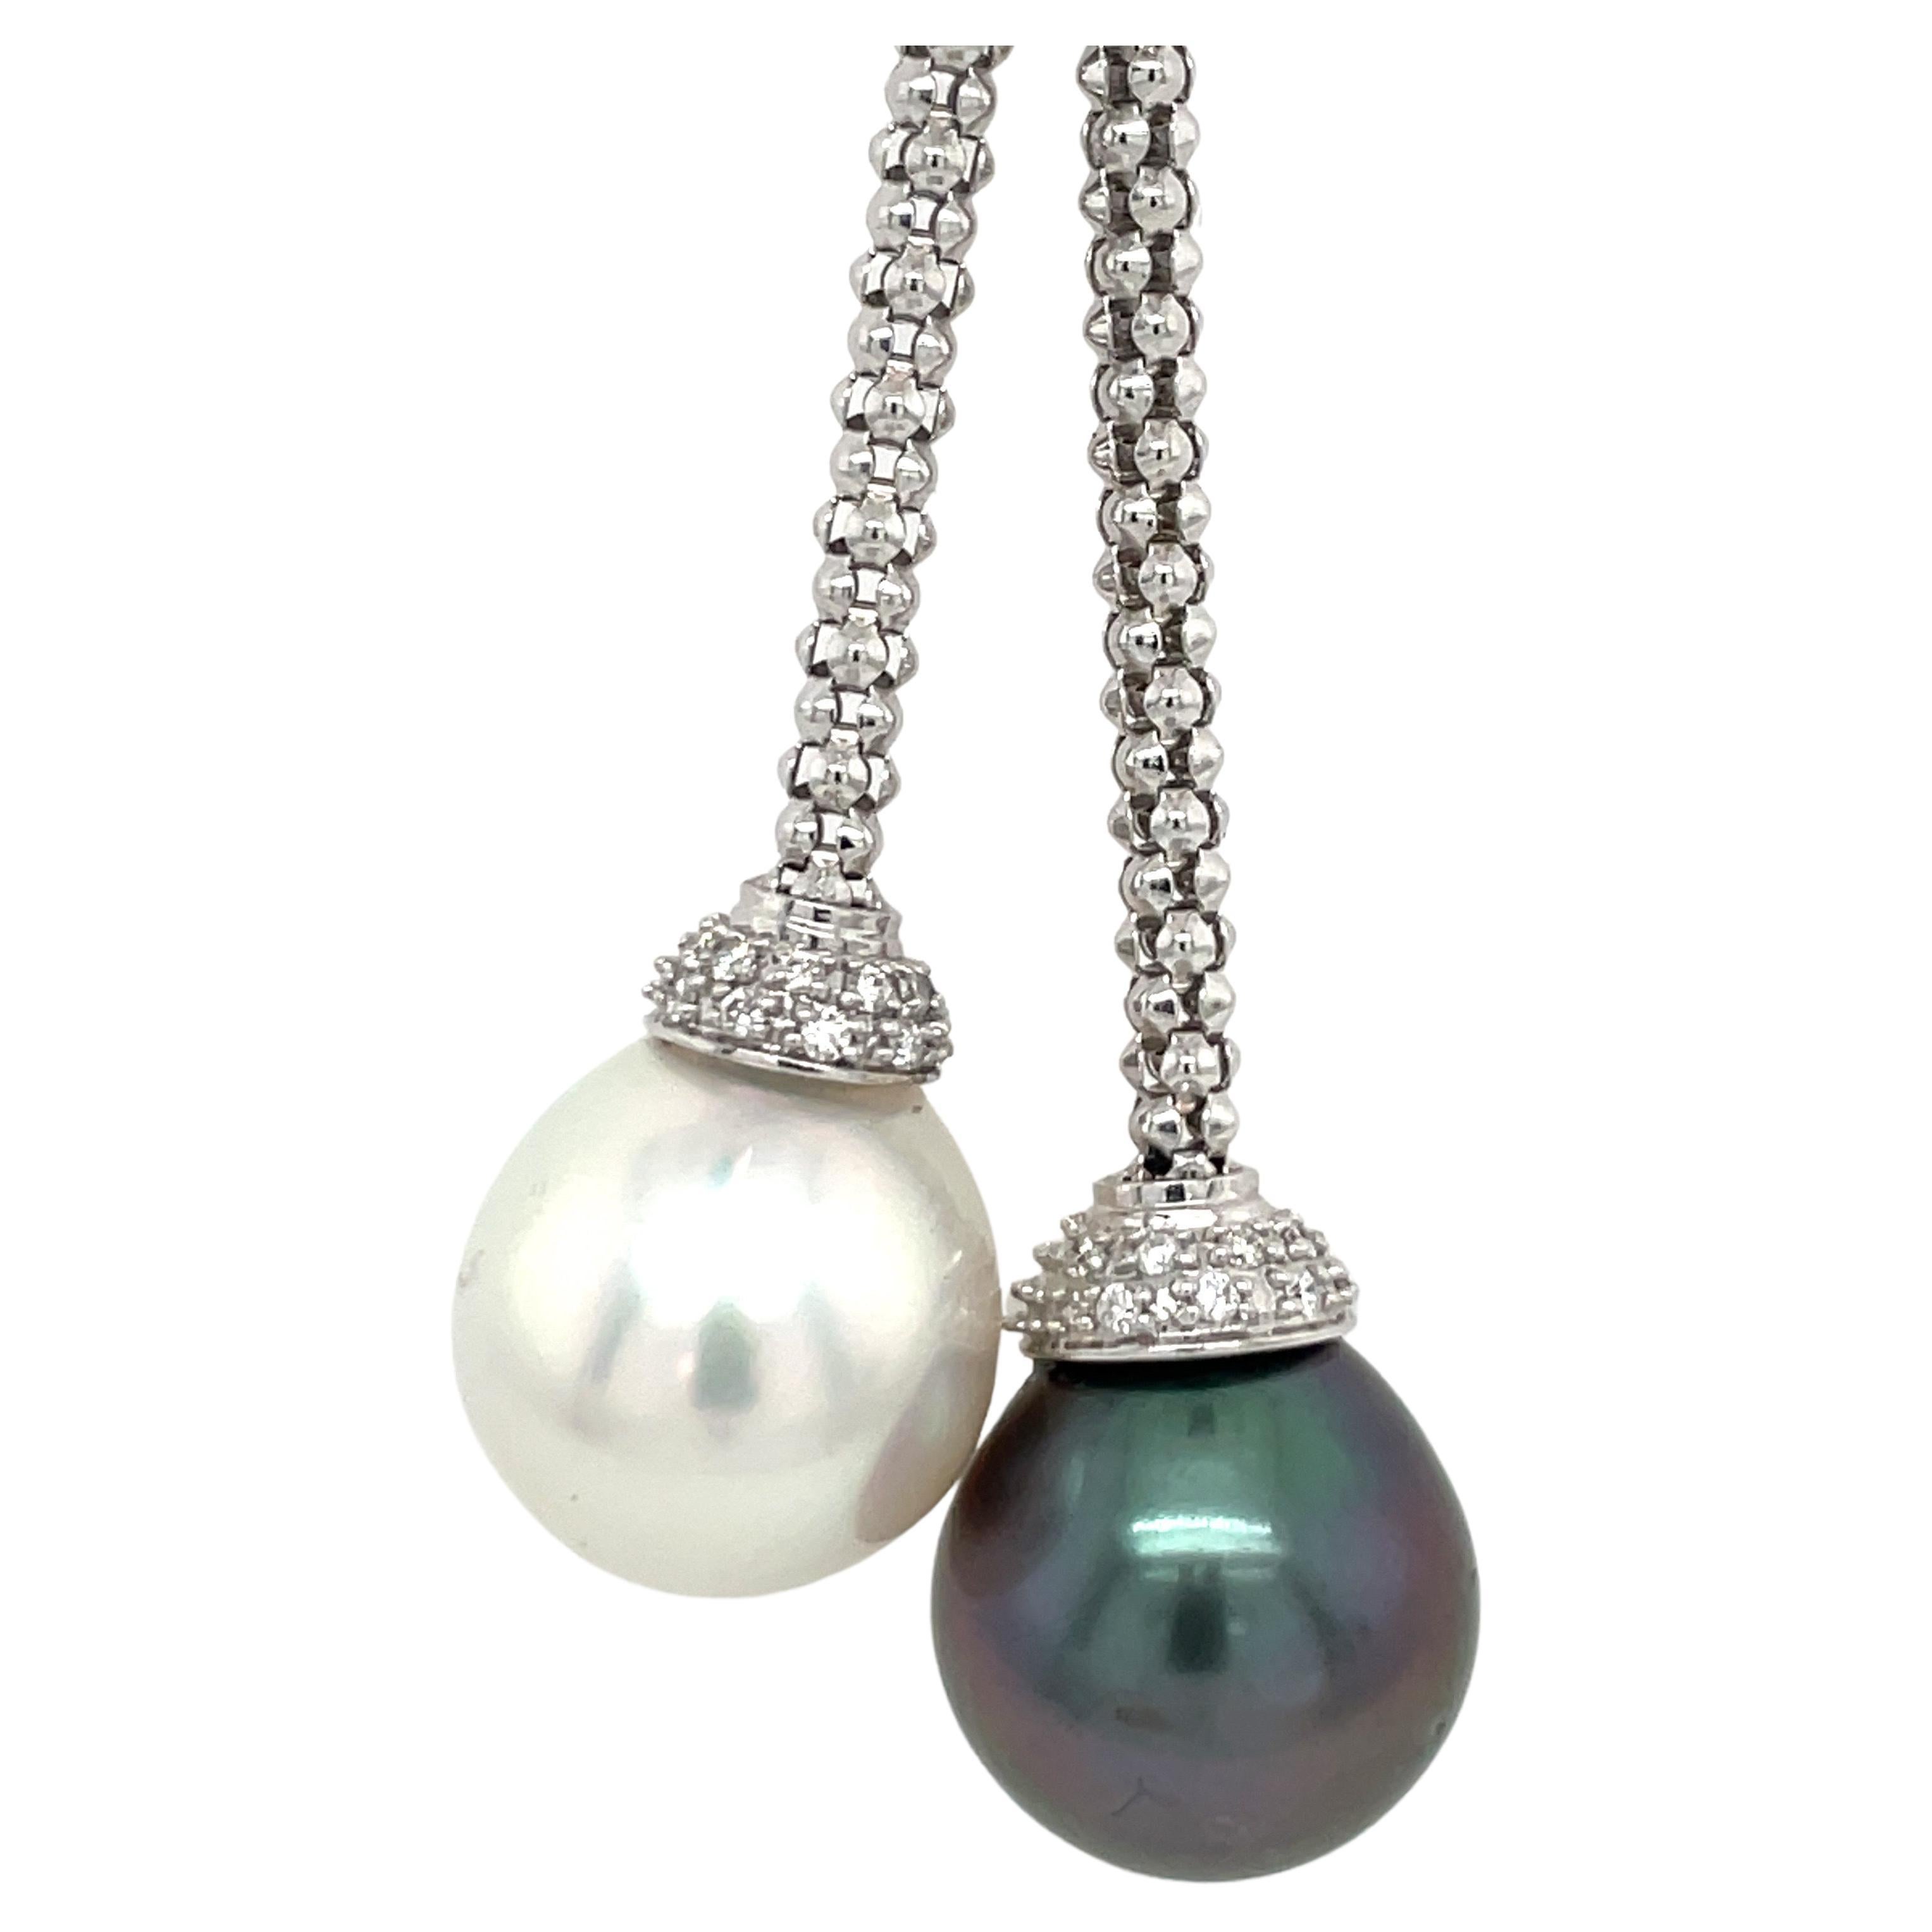 18 Karat White Gold Lariat featuring one South Sea Pearl & one Tahitian Pearl measuring 12-13 MM with a diamond cap weighing 0.11 carats and 29 Baguette diamonds weighing 0.50 carats.
Can customize in different pearl colors & gold.
DM for more info